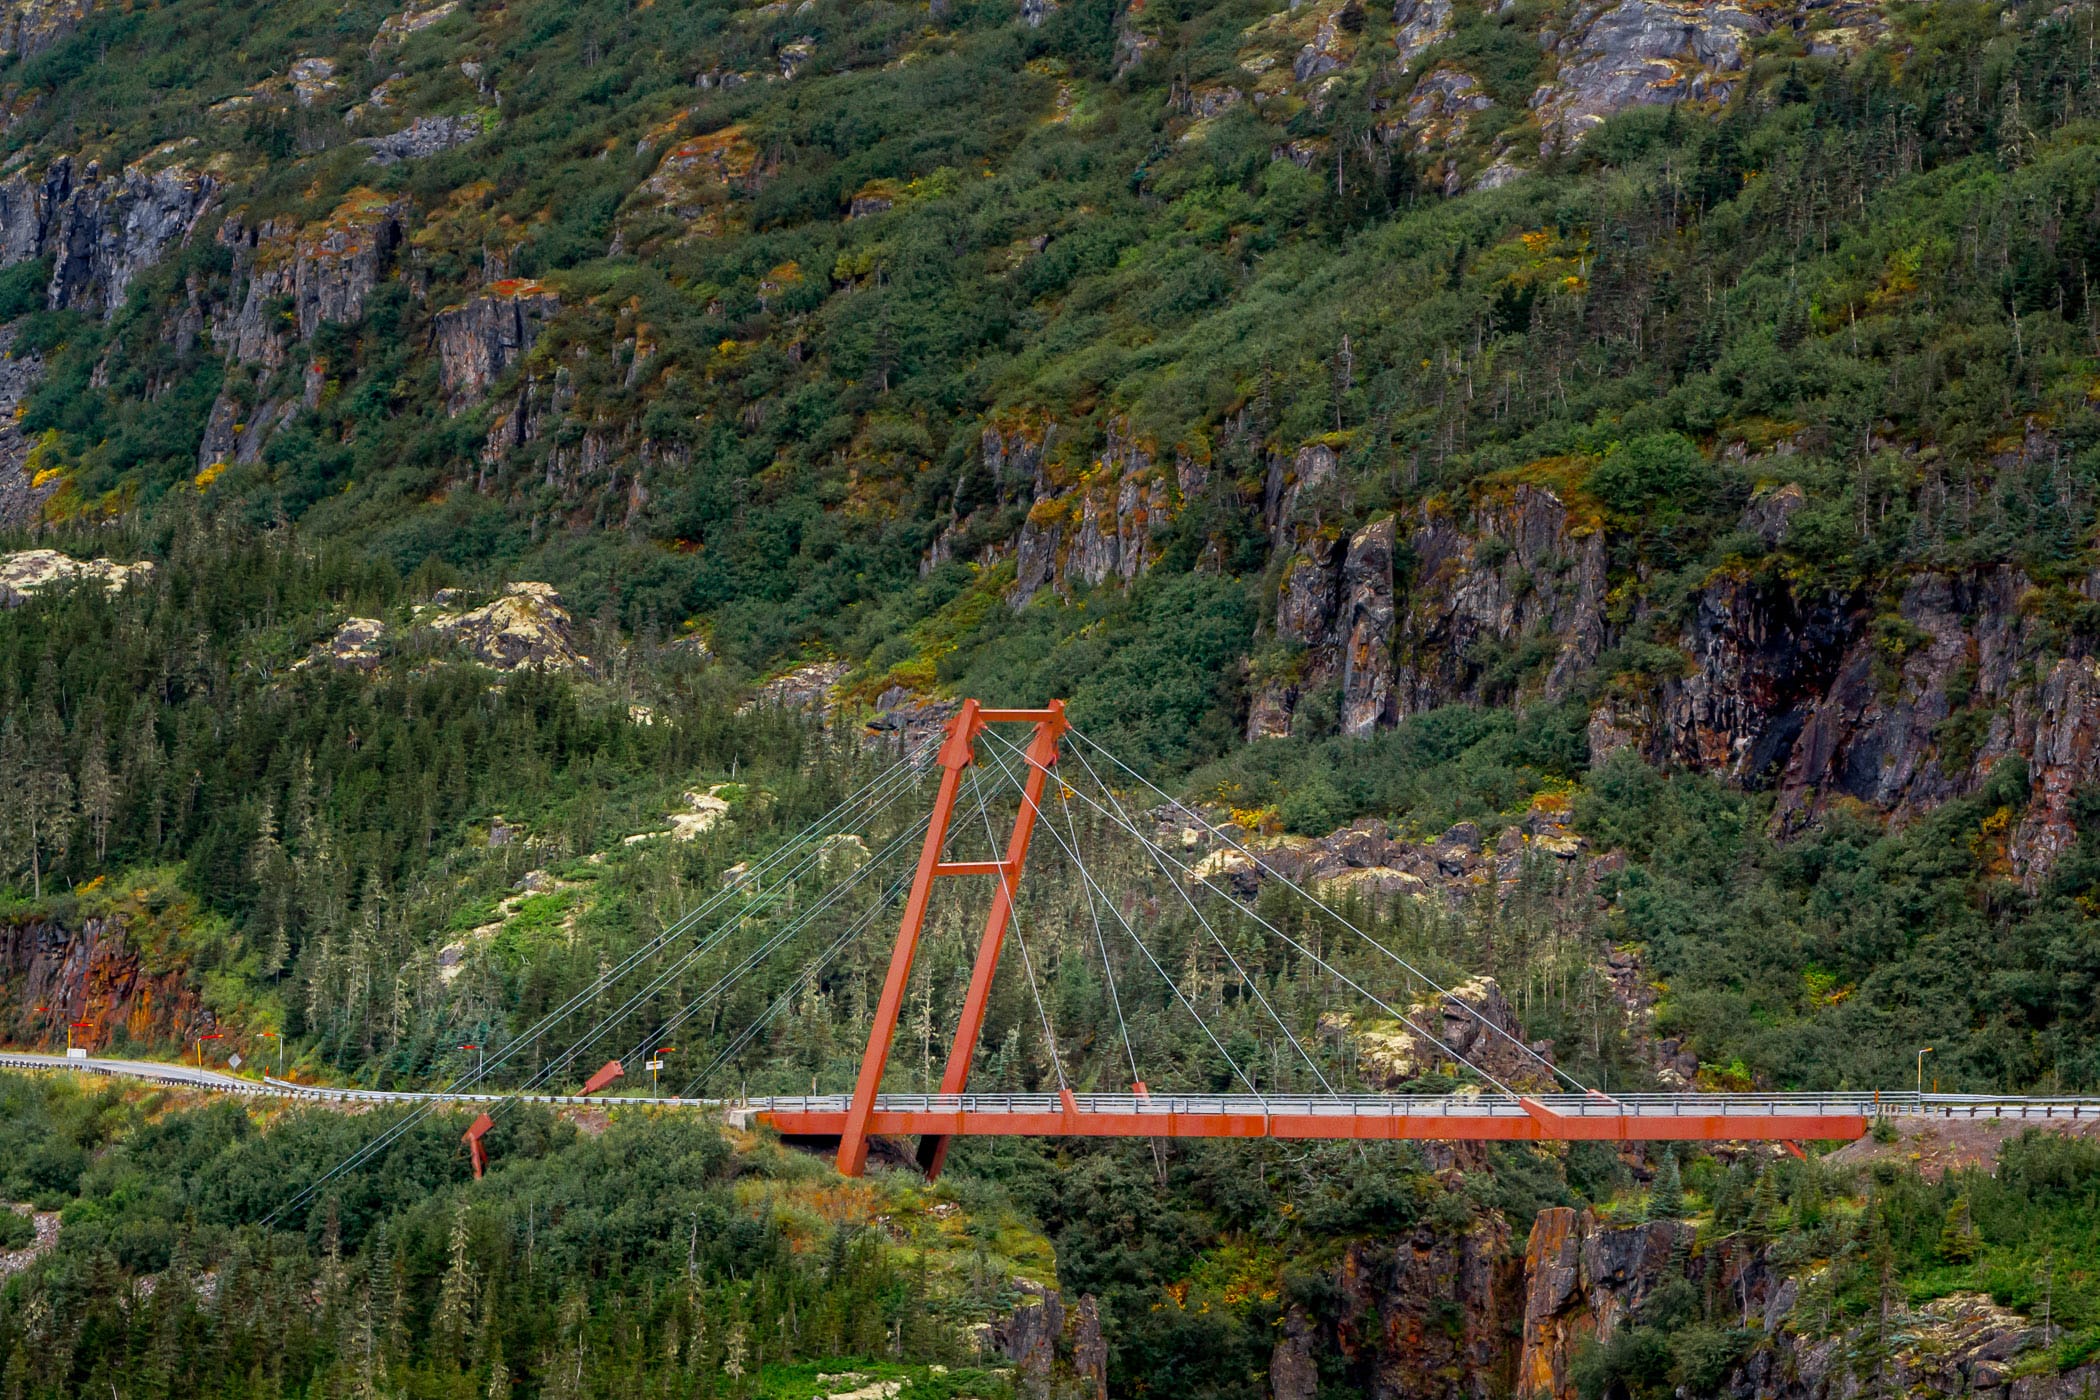 The Captain William Moore Suspension Bridge on the Klondike Highway near Skagway, Alaska. Interestingly, this bridge is only anchored on one side in the hopes that it won't collapse in the event of an earthquake.